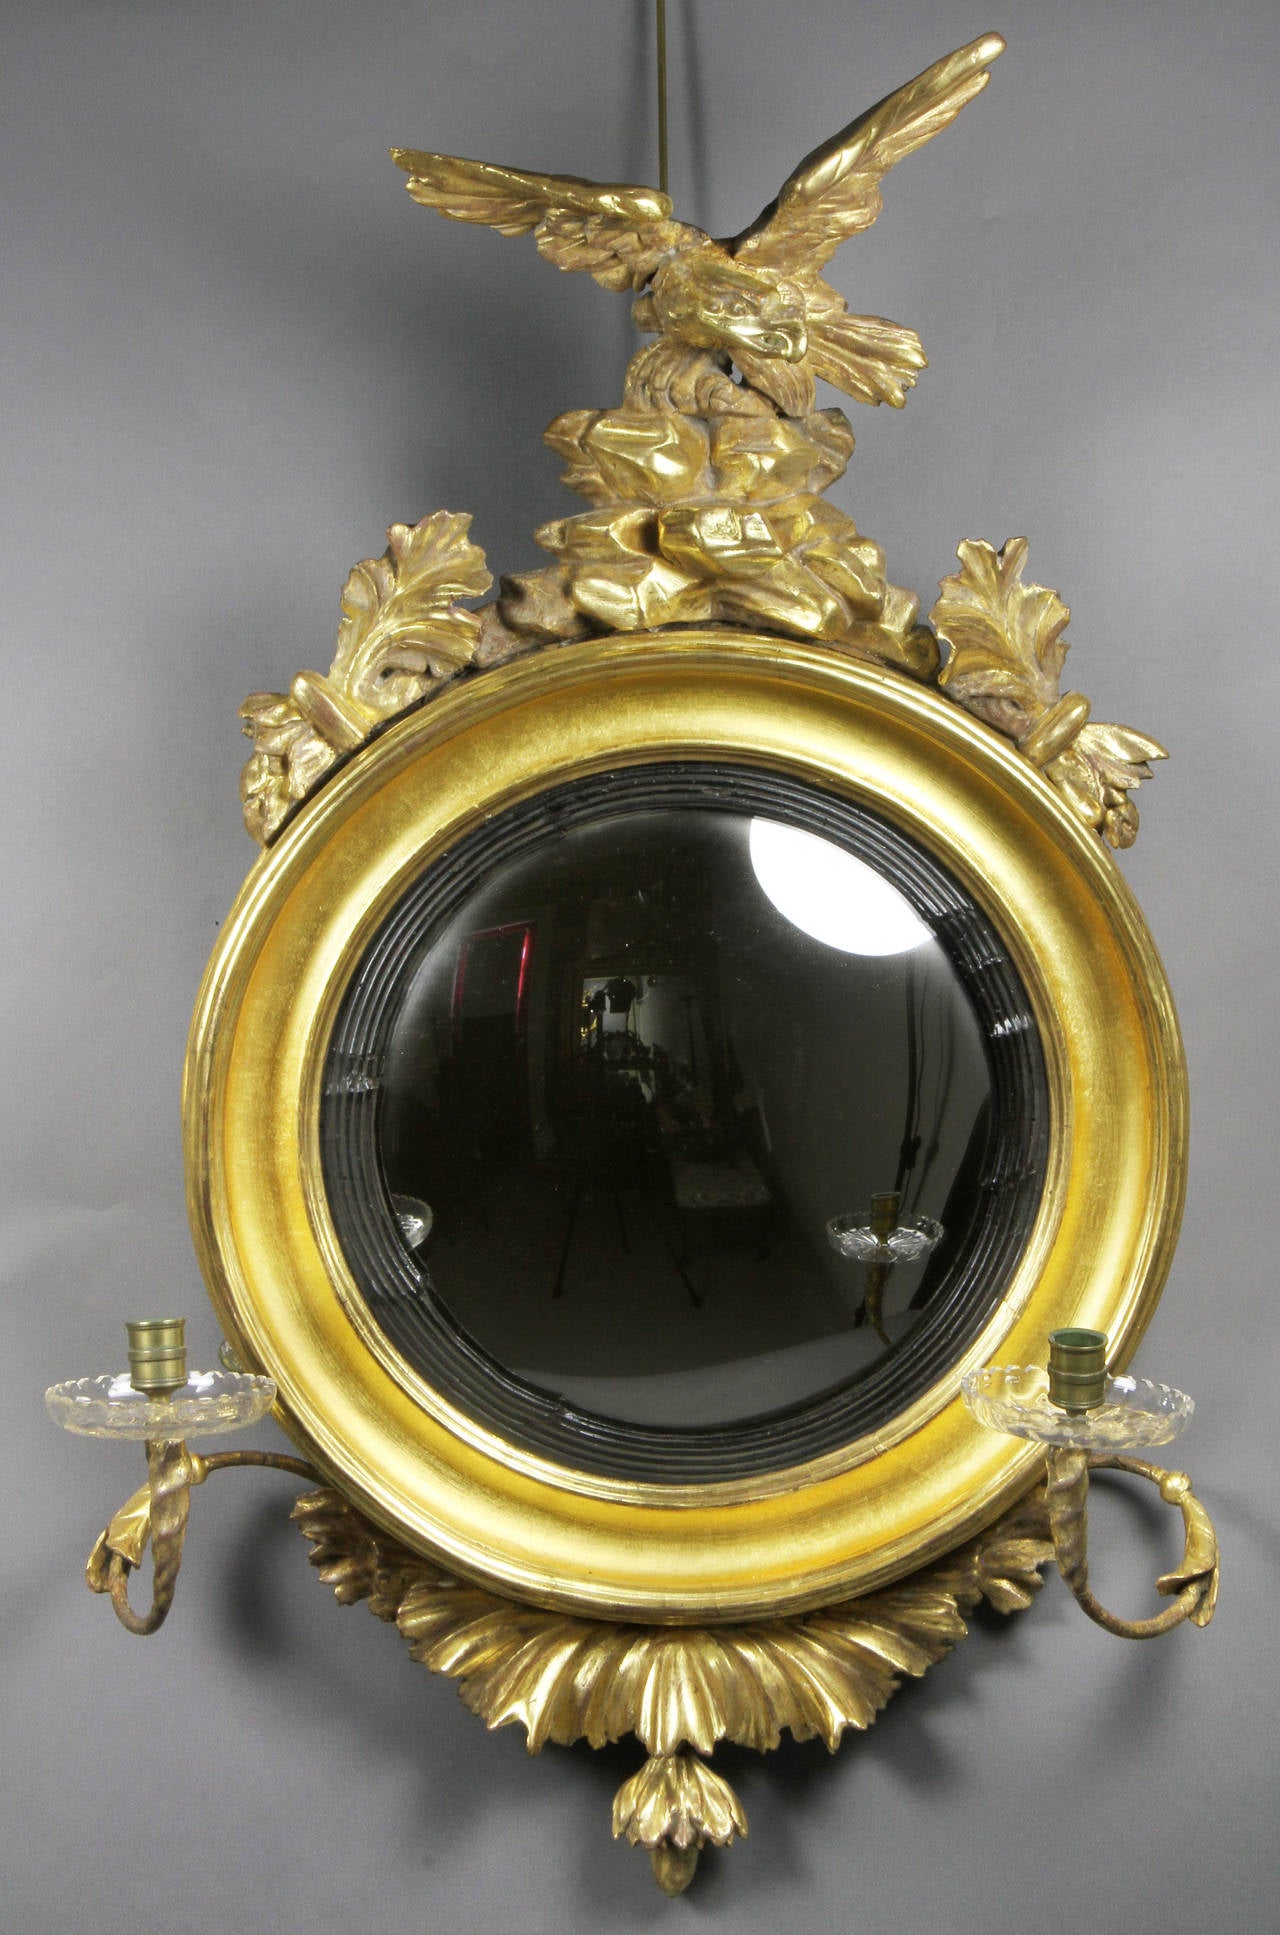 Typical form with eagle finial with rockwork surrounded by acanthus , round mirror with ebonized  reeded band , with pair of candle arms , base with leaf work and floral pendant.